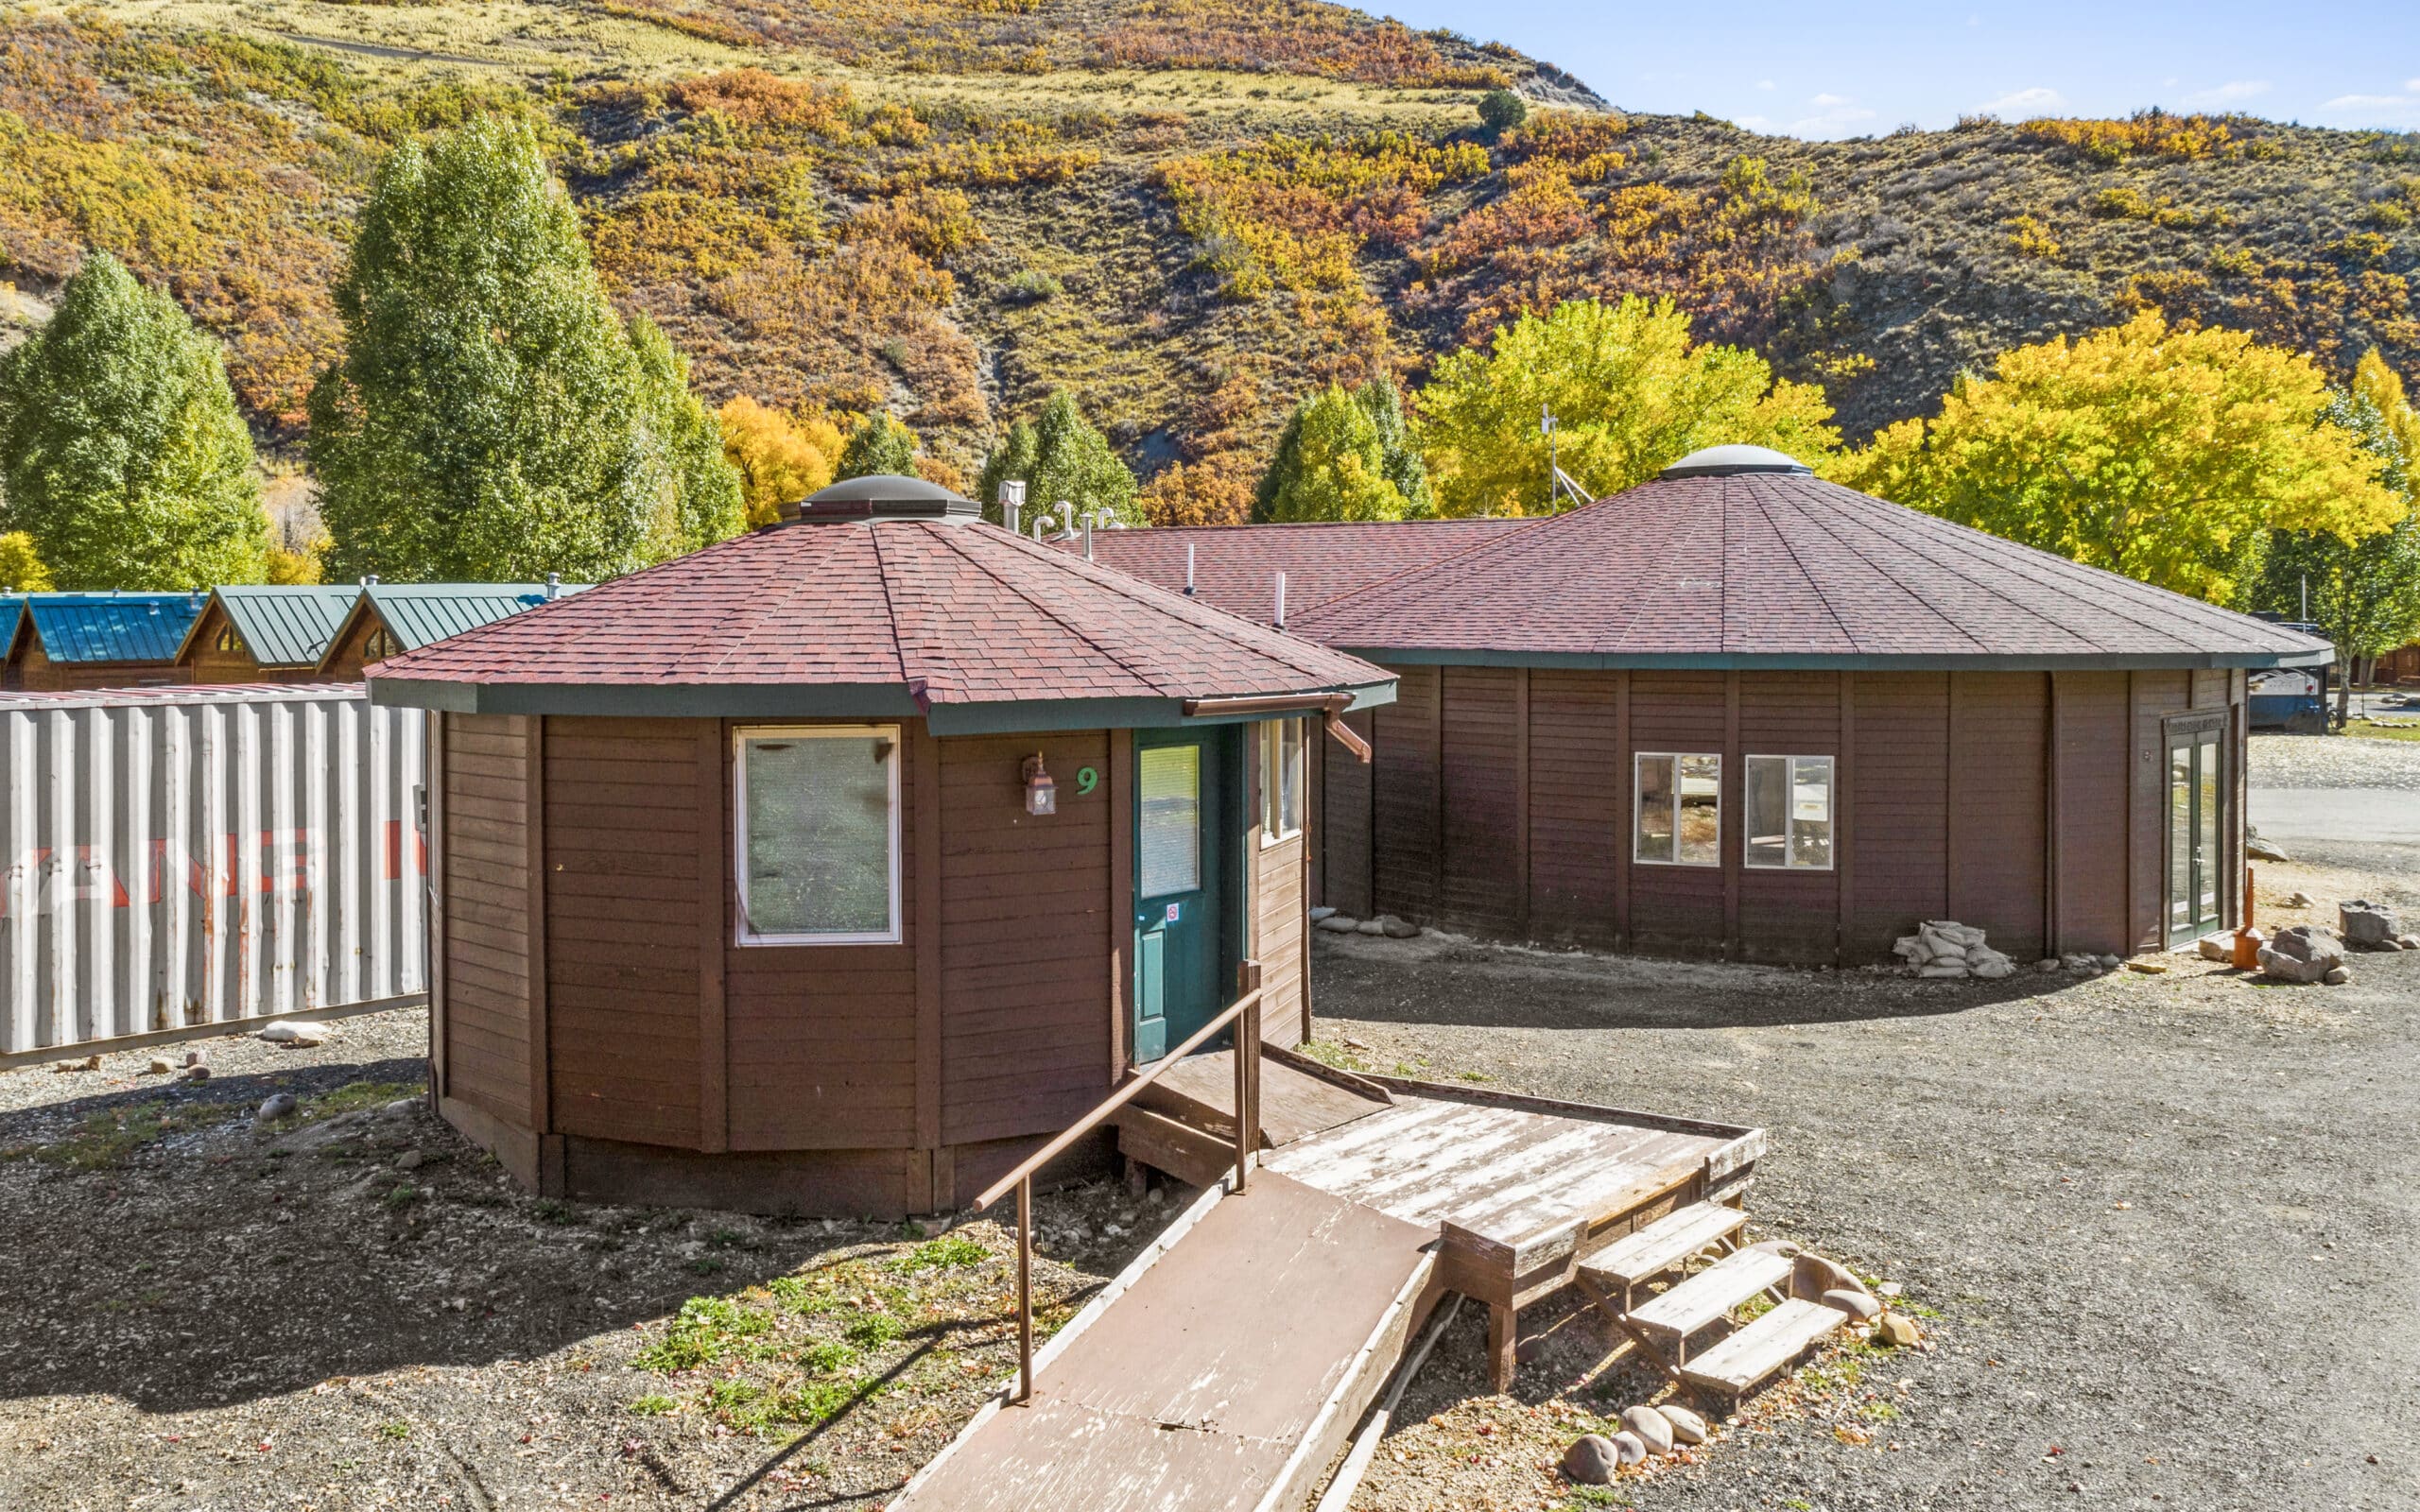 Yurt-style cabins at the Rivers Edge campground near Heber Valley, UT